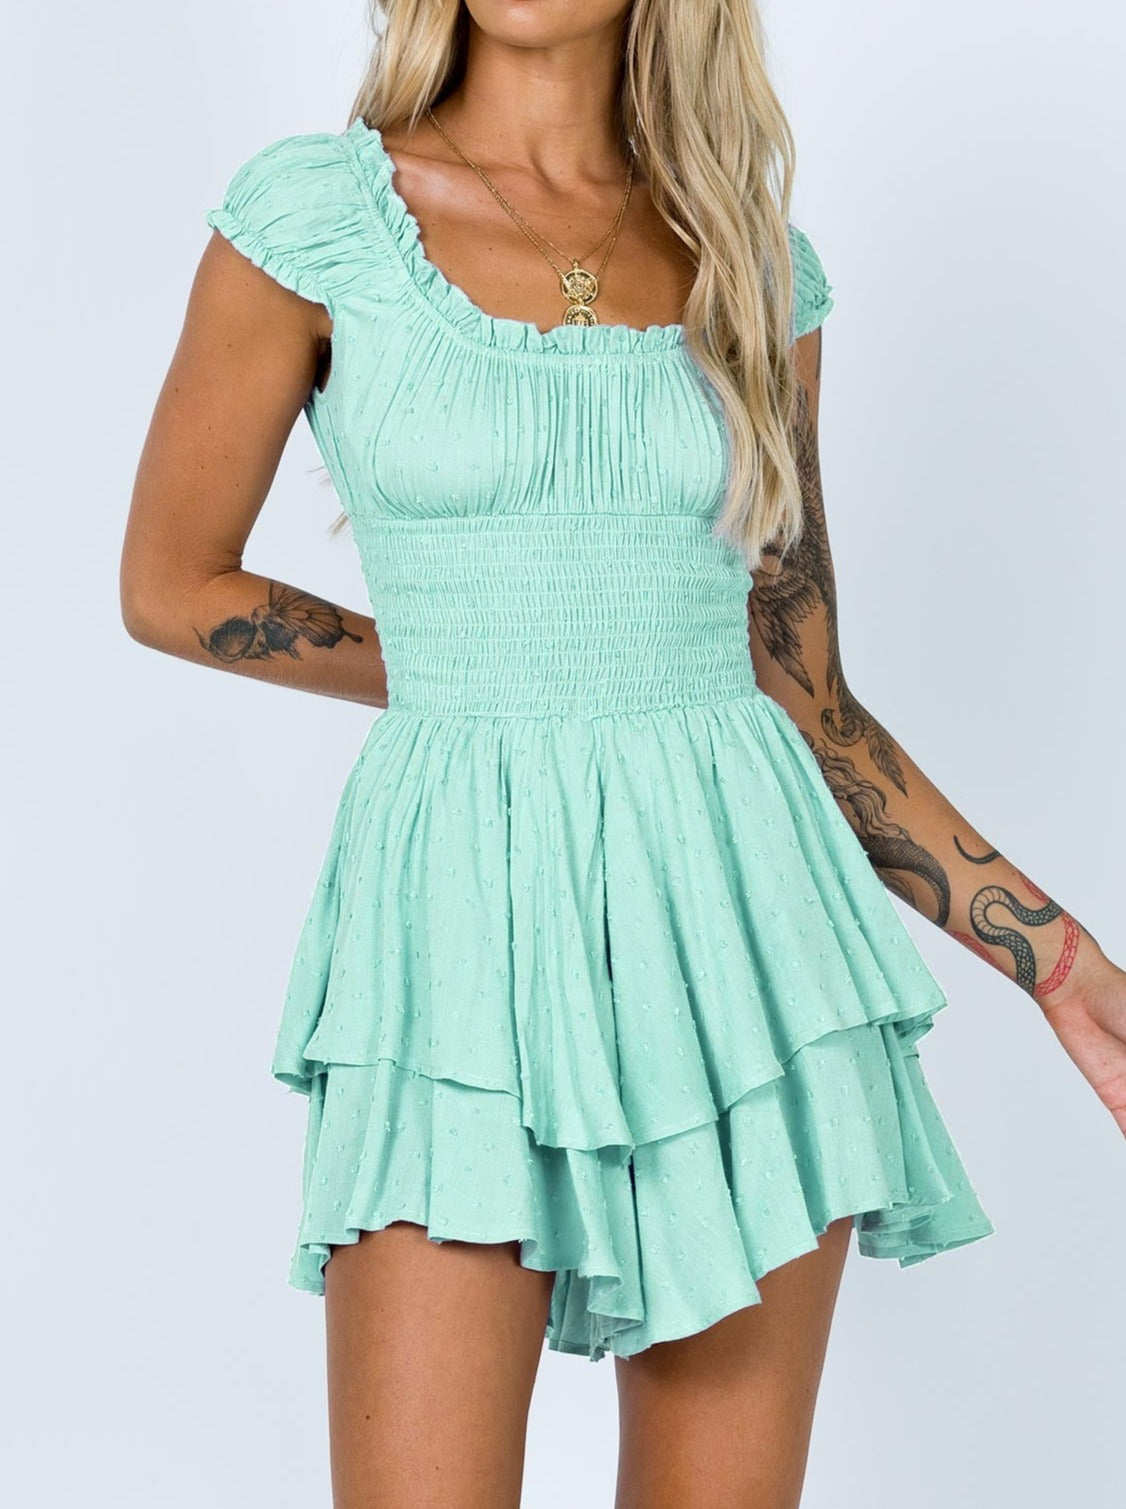 NTG Fad Dress light green / S Wrapped chest short-sleeved one-shoulder cotton and linen embroidered skirt